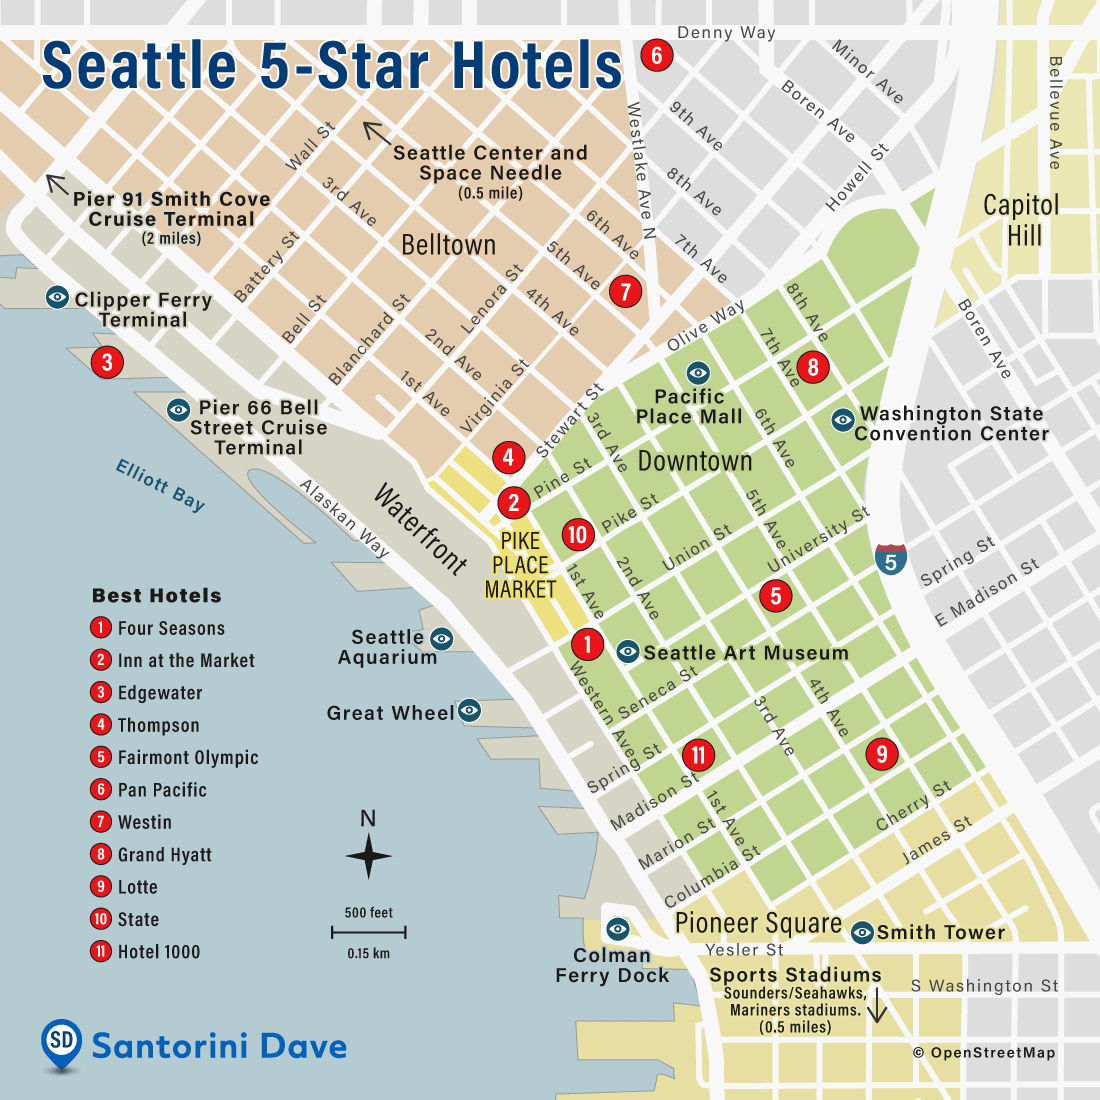 Map of Seattle 5-star Hotels.